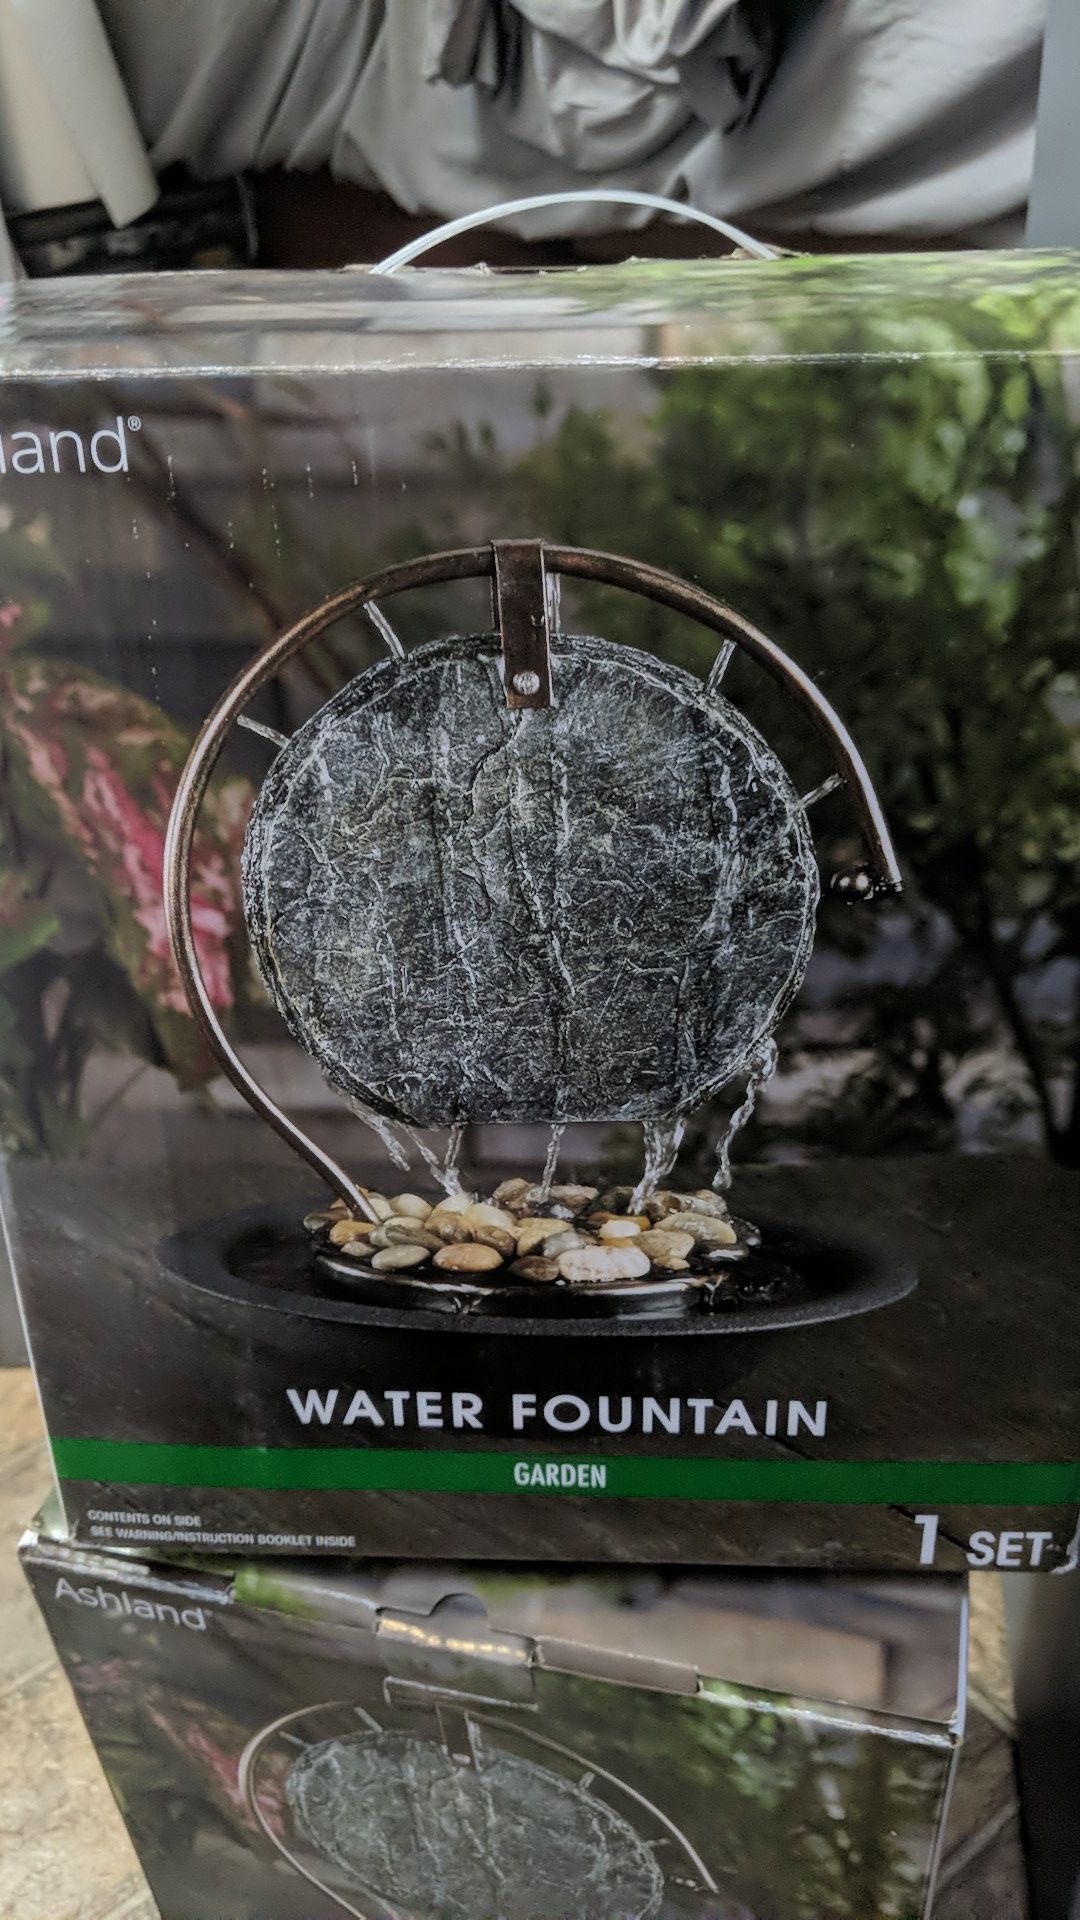 2 Brand New water fountains in box